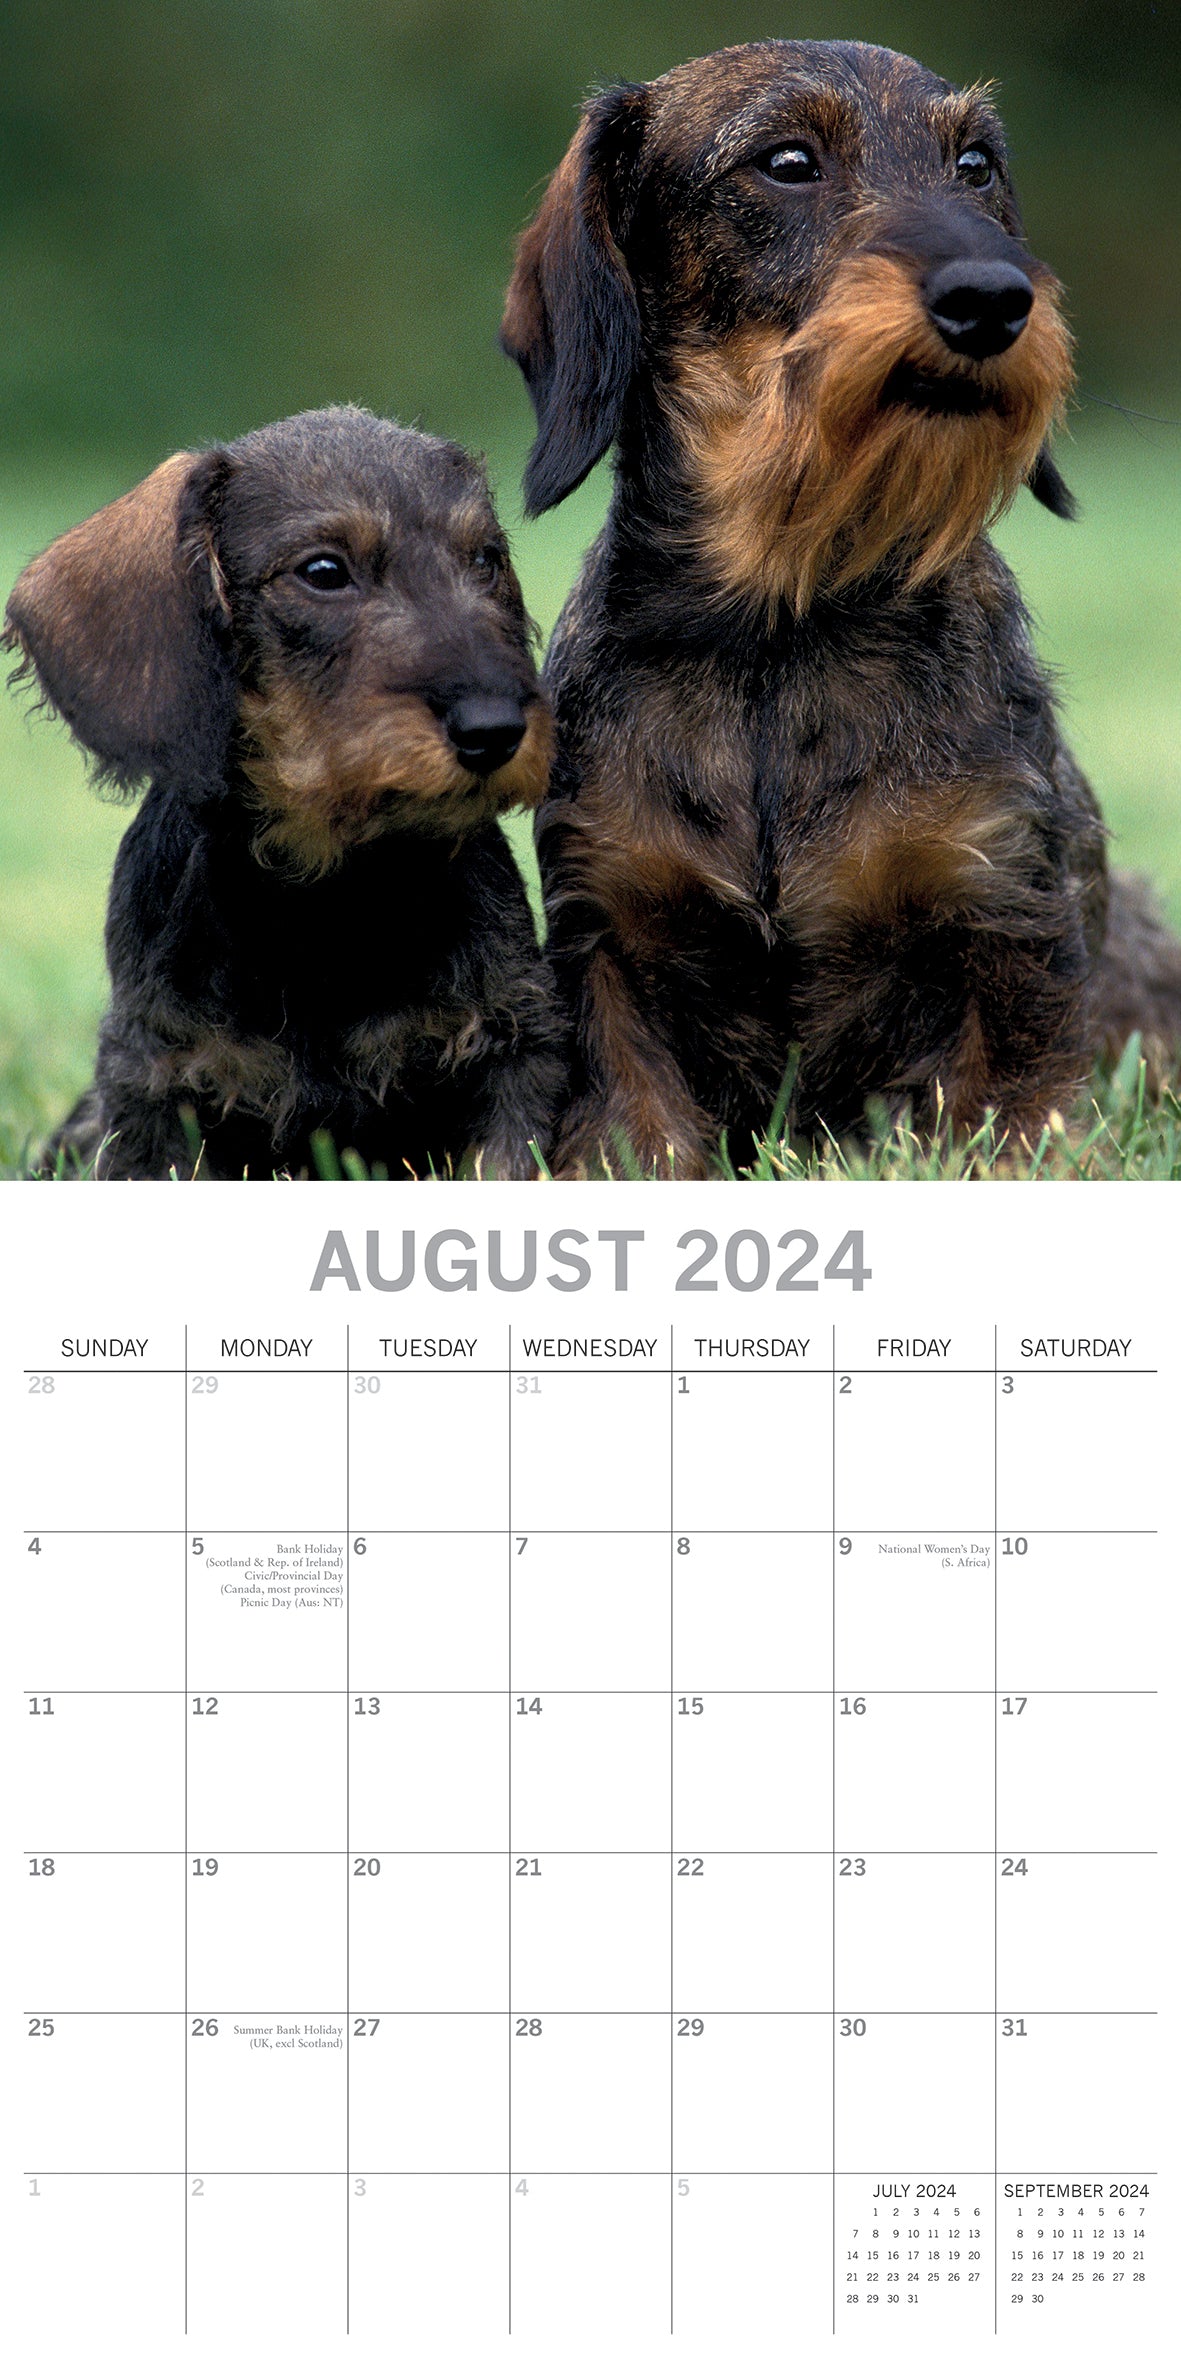 Dachshunds 2024 Square Wall Calendar Pets Dog 16 Months Premium Planner New Year